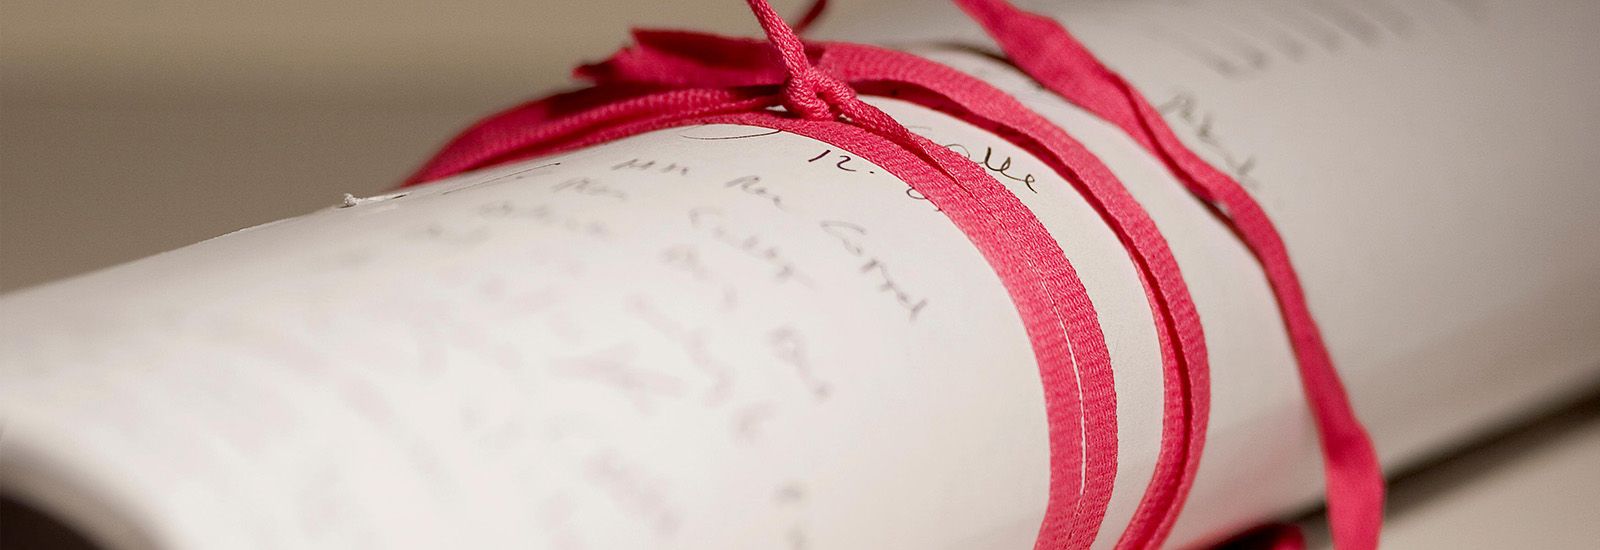 Close up of a handwritten document rolled and tied with a red ribbon